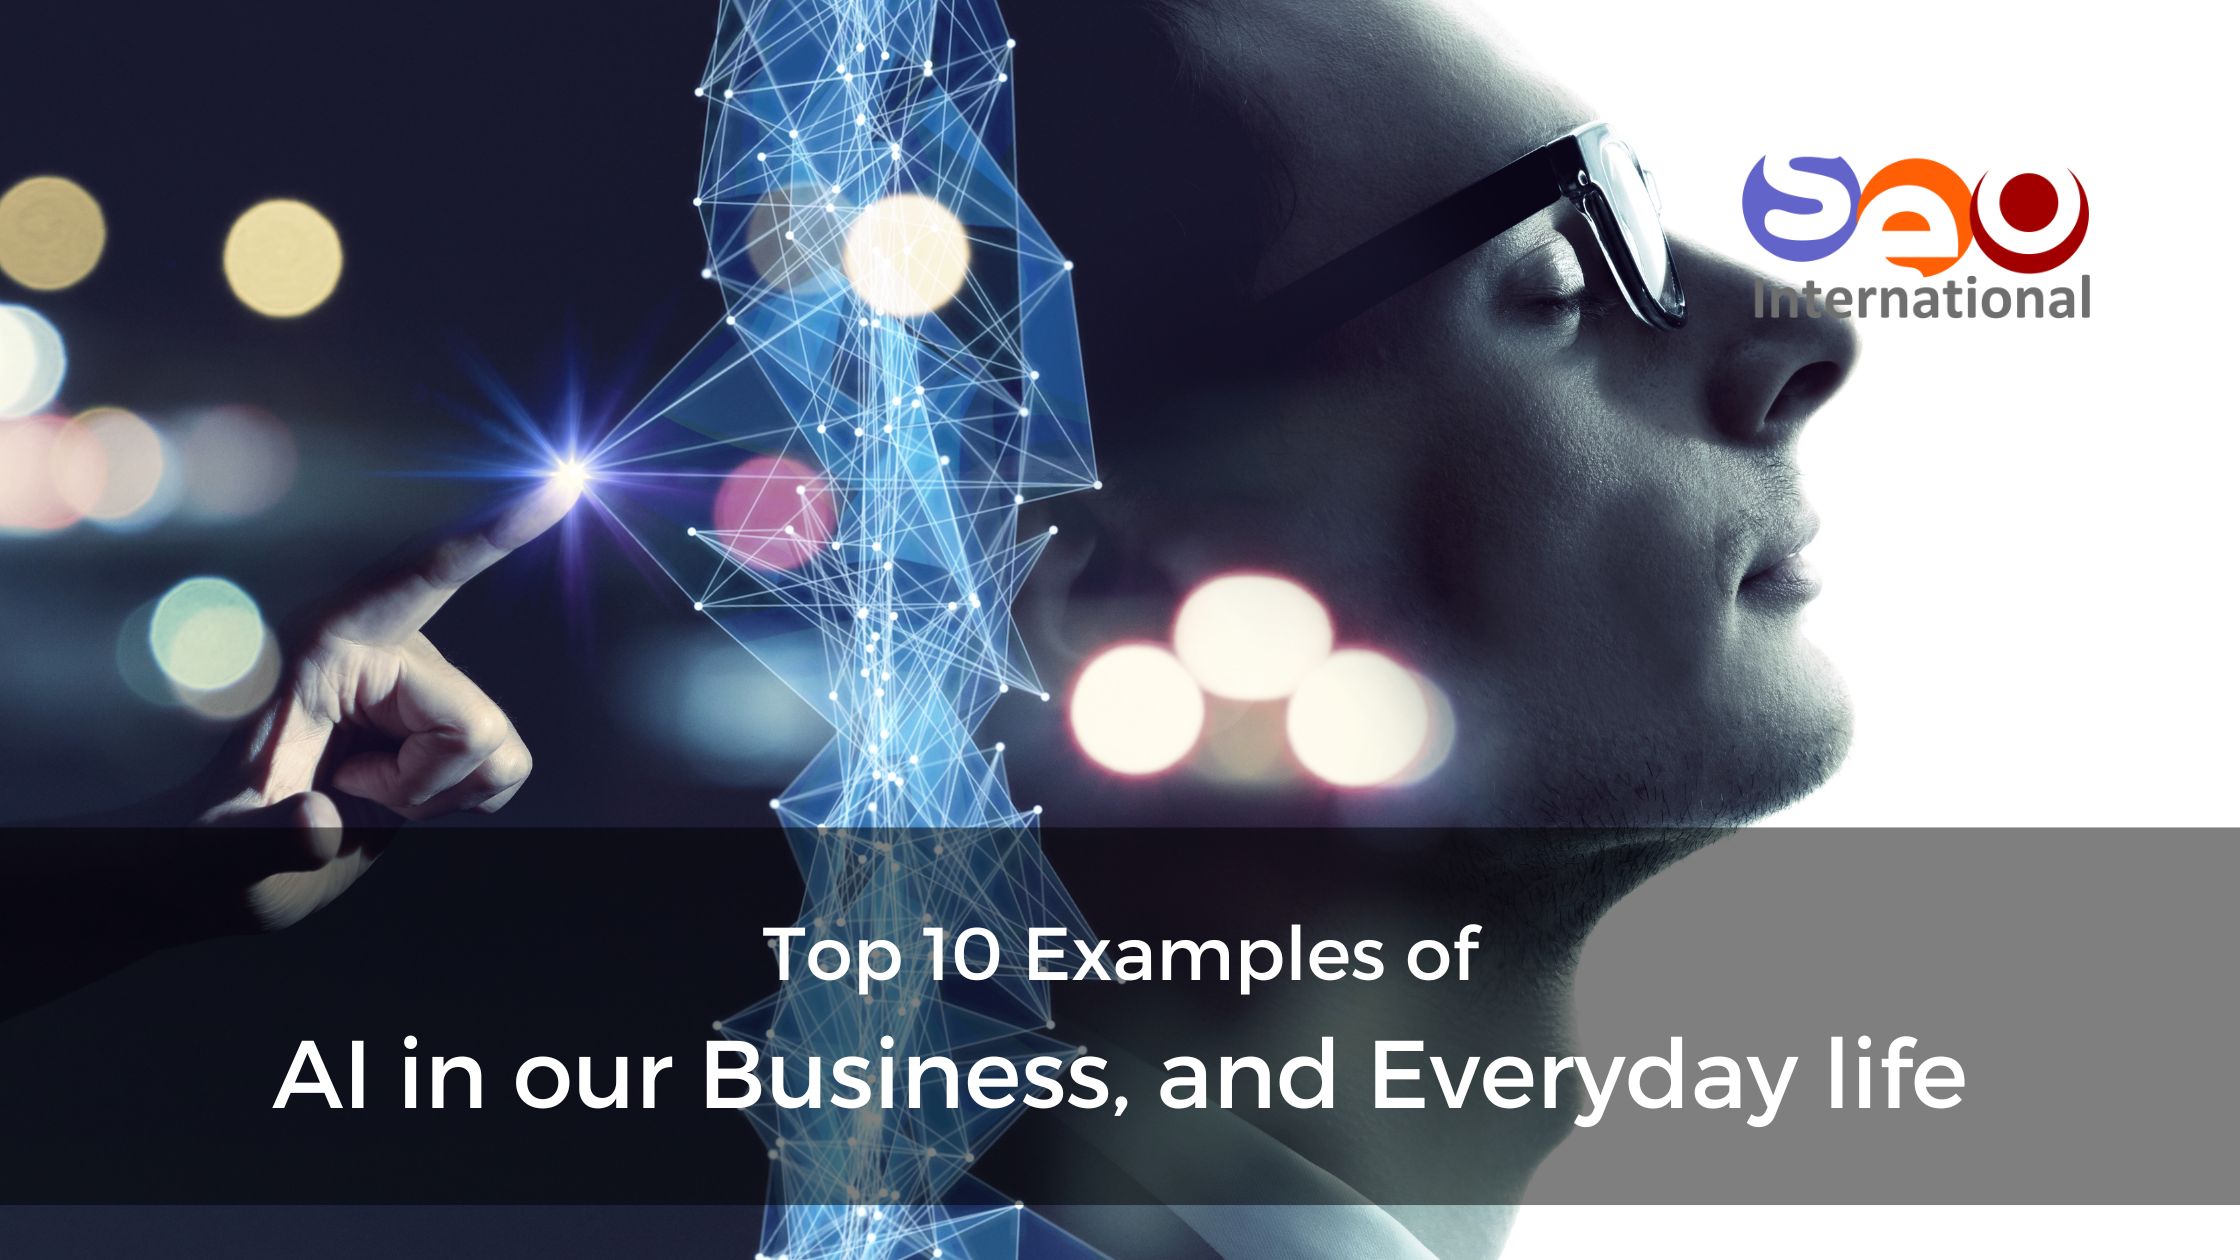 AI in our Business and Everyday Life - Top 10 Examples